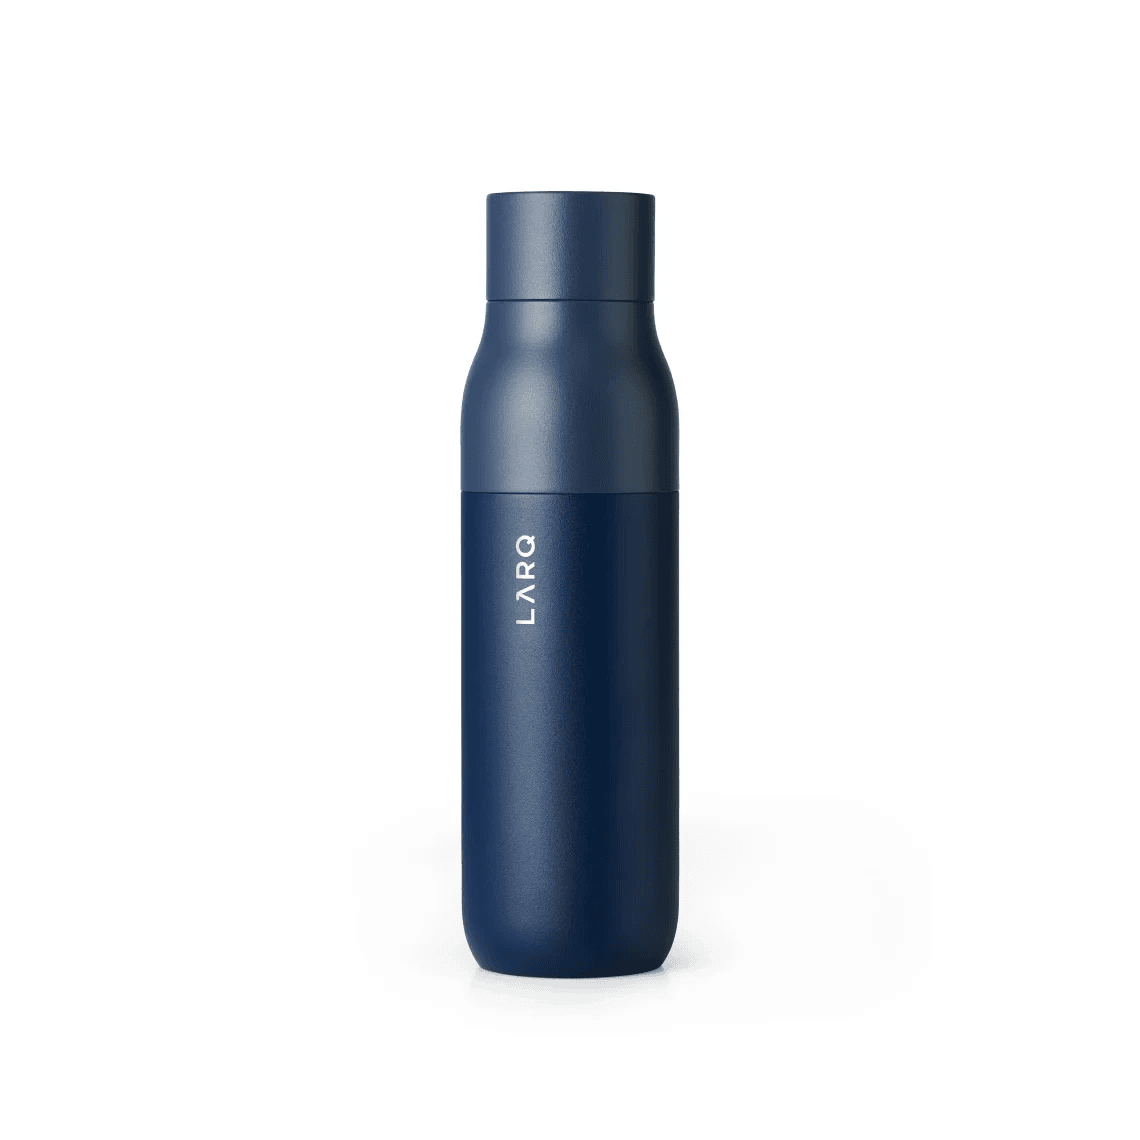 LARQ Bottle PureVis 740ml - The Luxury Promotional Gifts Company Limited